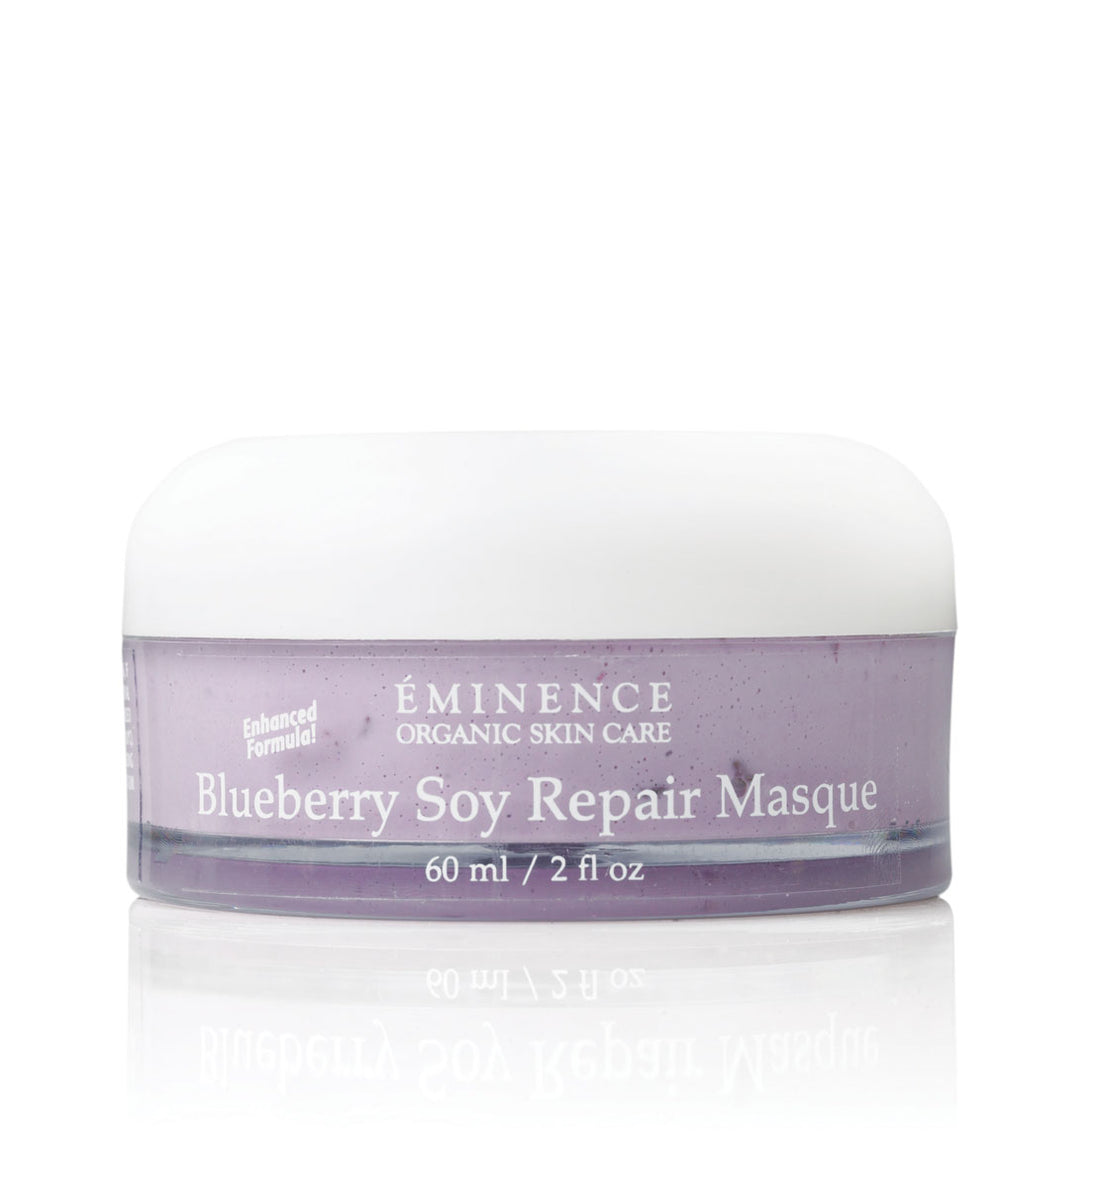 Eminence Organic Blueberry Soy Repair Masque